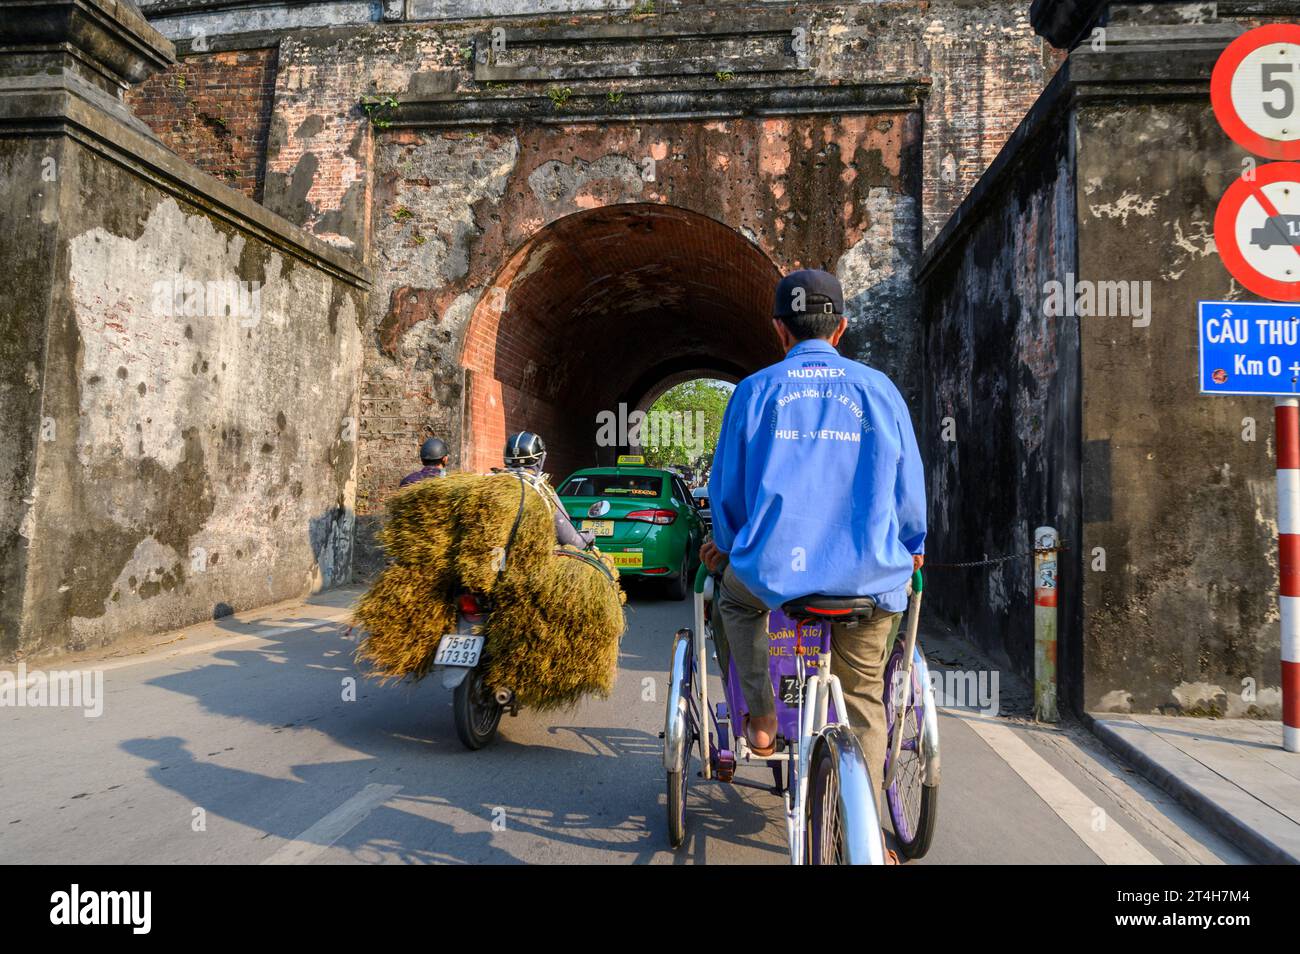 A tricycle taxi cyclist pedals a tourist along the roads in Hue city, Vietnam. Stock Photo